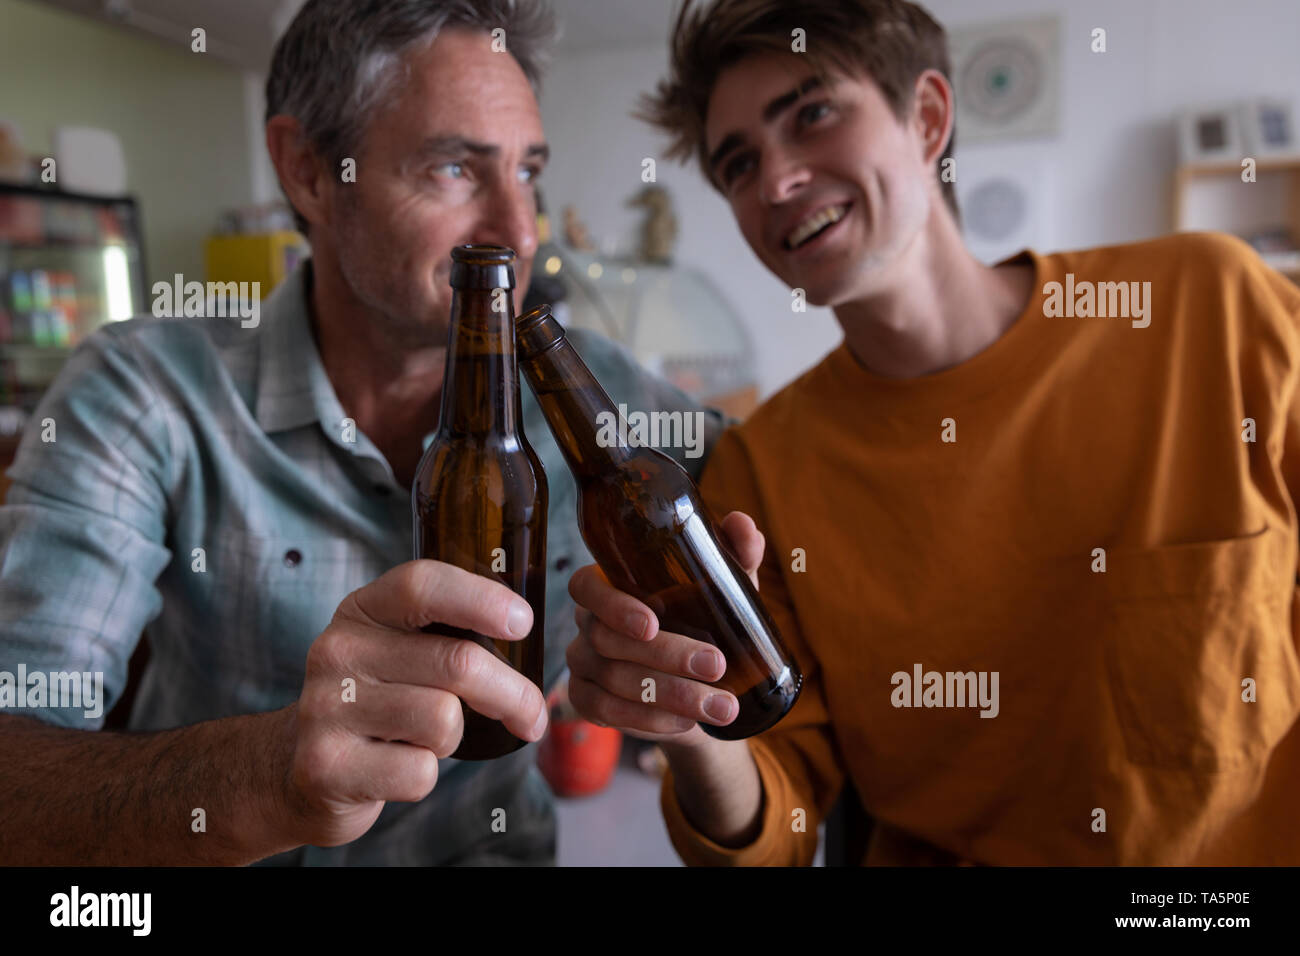 Father and son toasting beer bottle Stock Photo